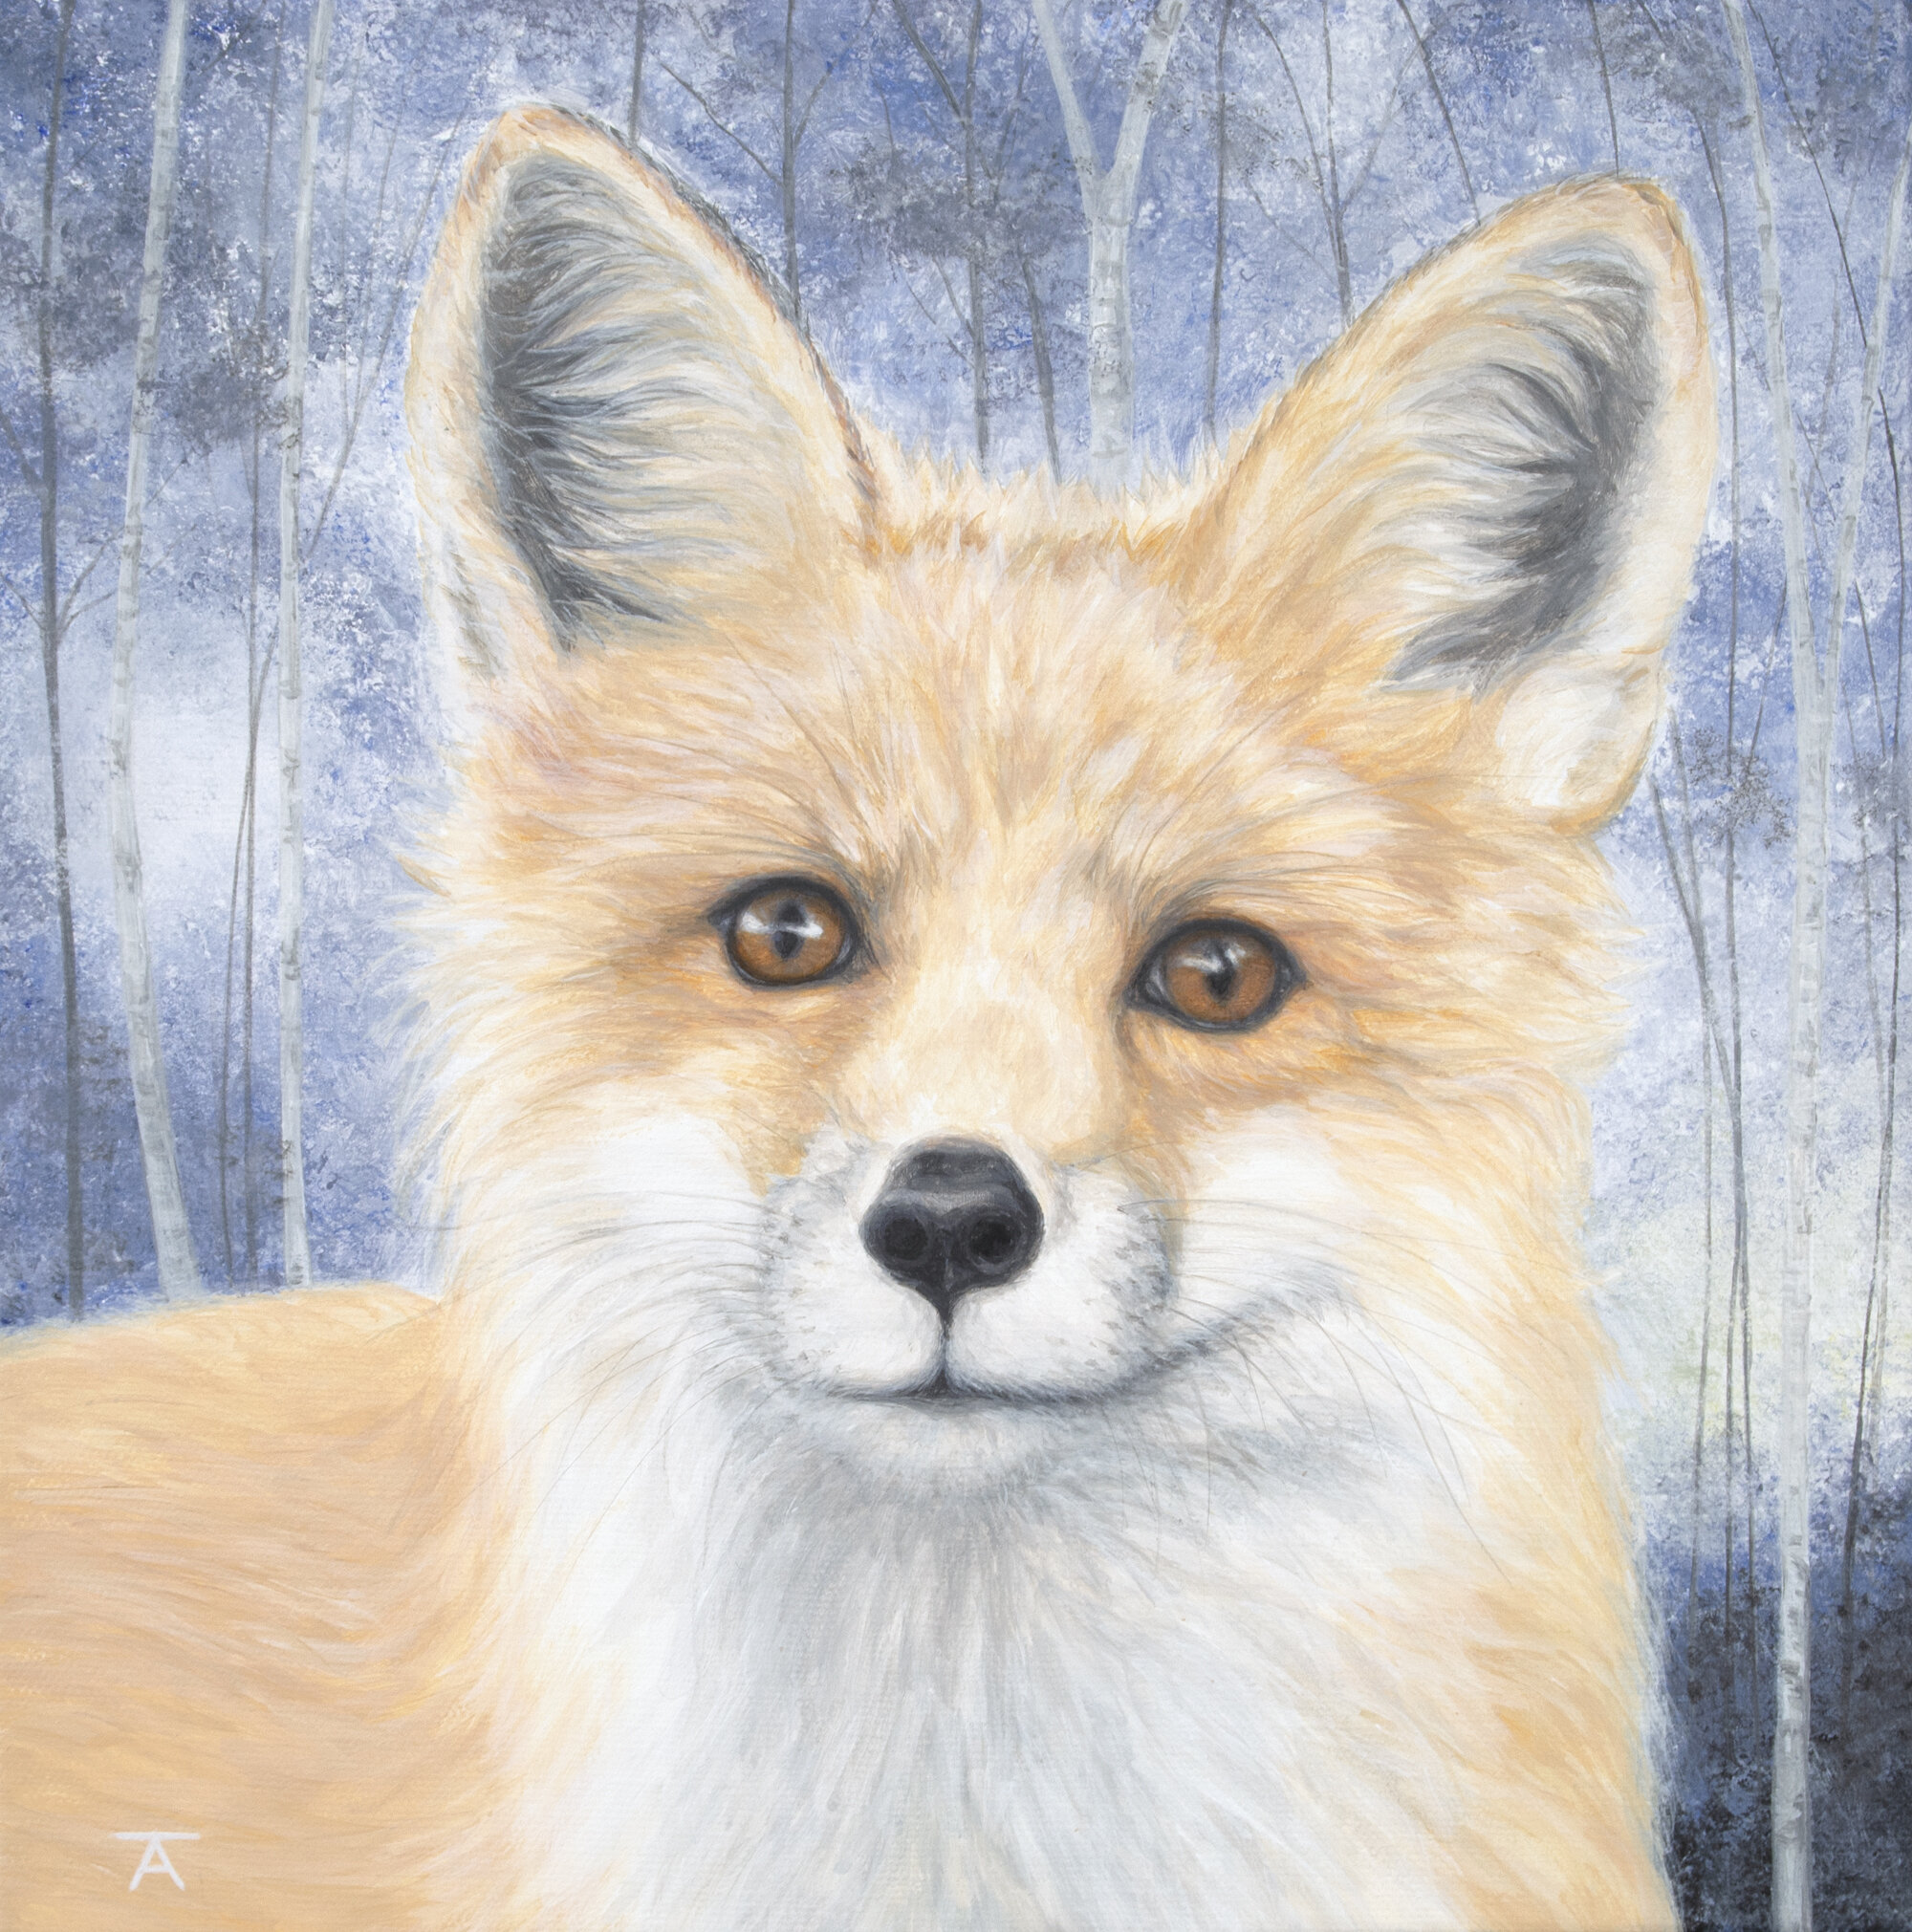 into the woods: the little fox - sold